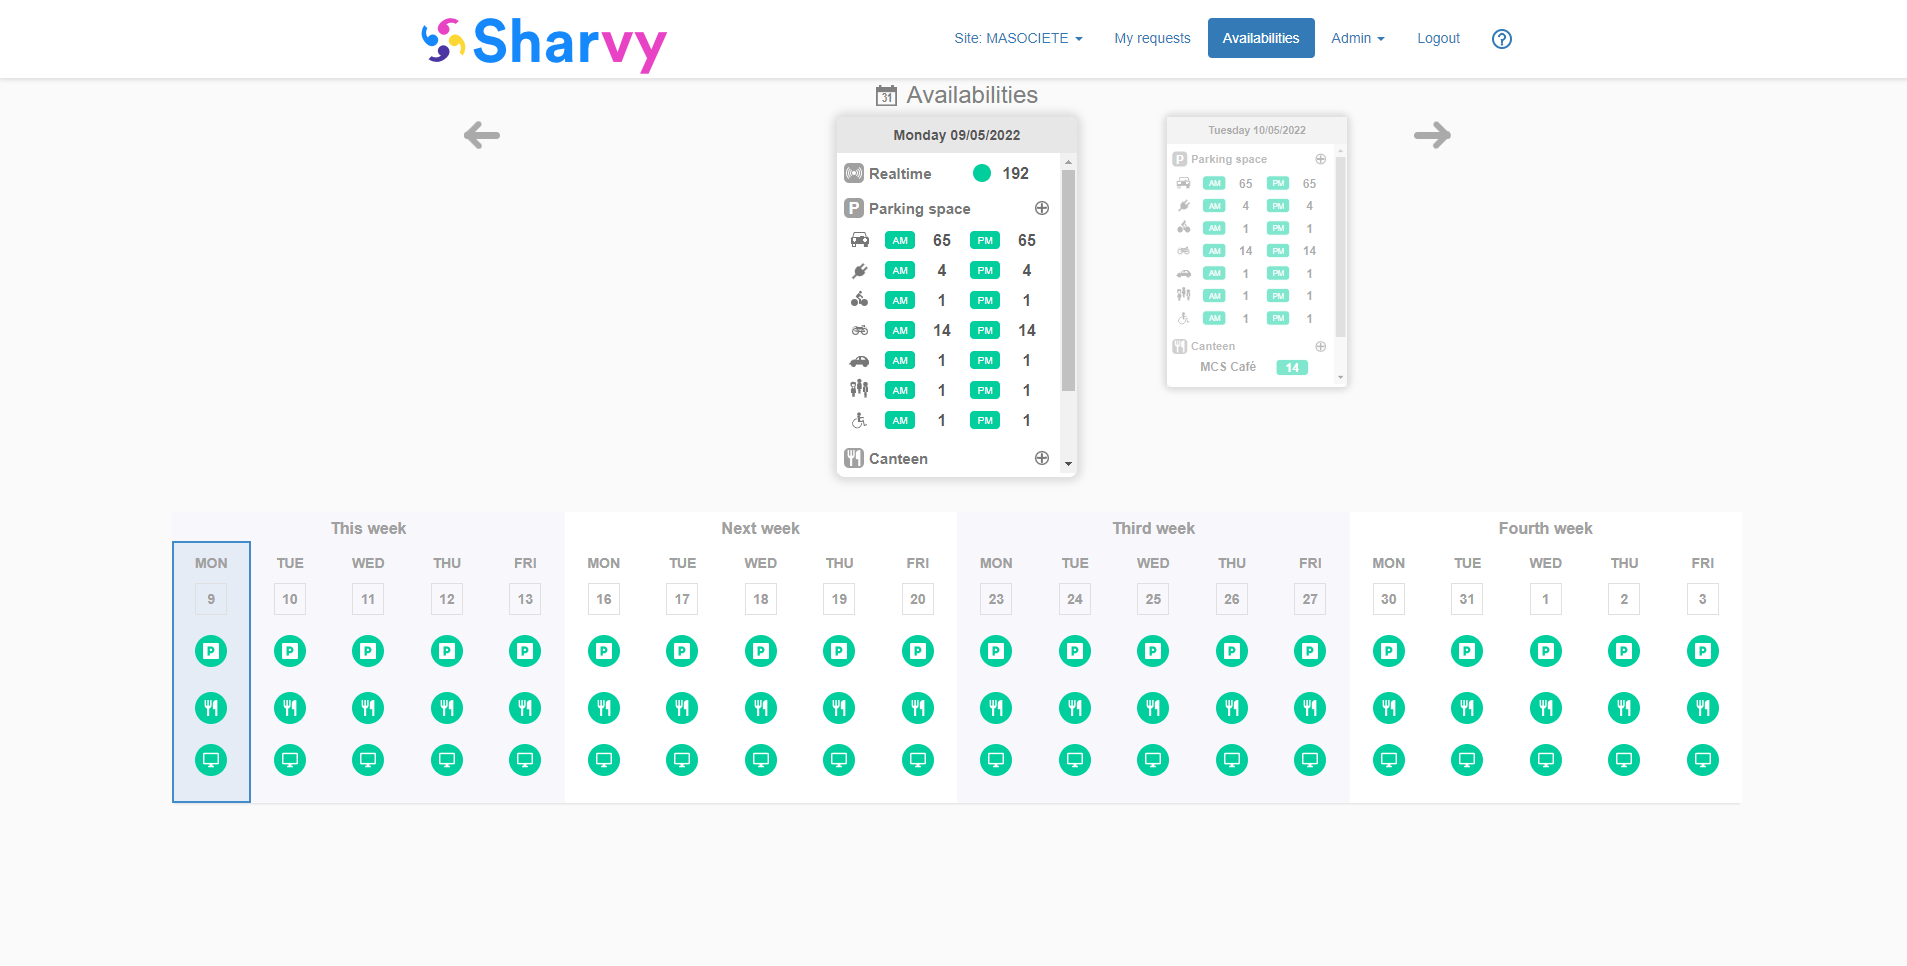 Sharvy - Availabilities tab - Detail of available places on a given day